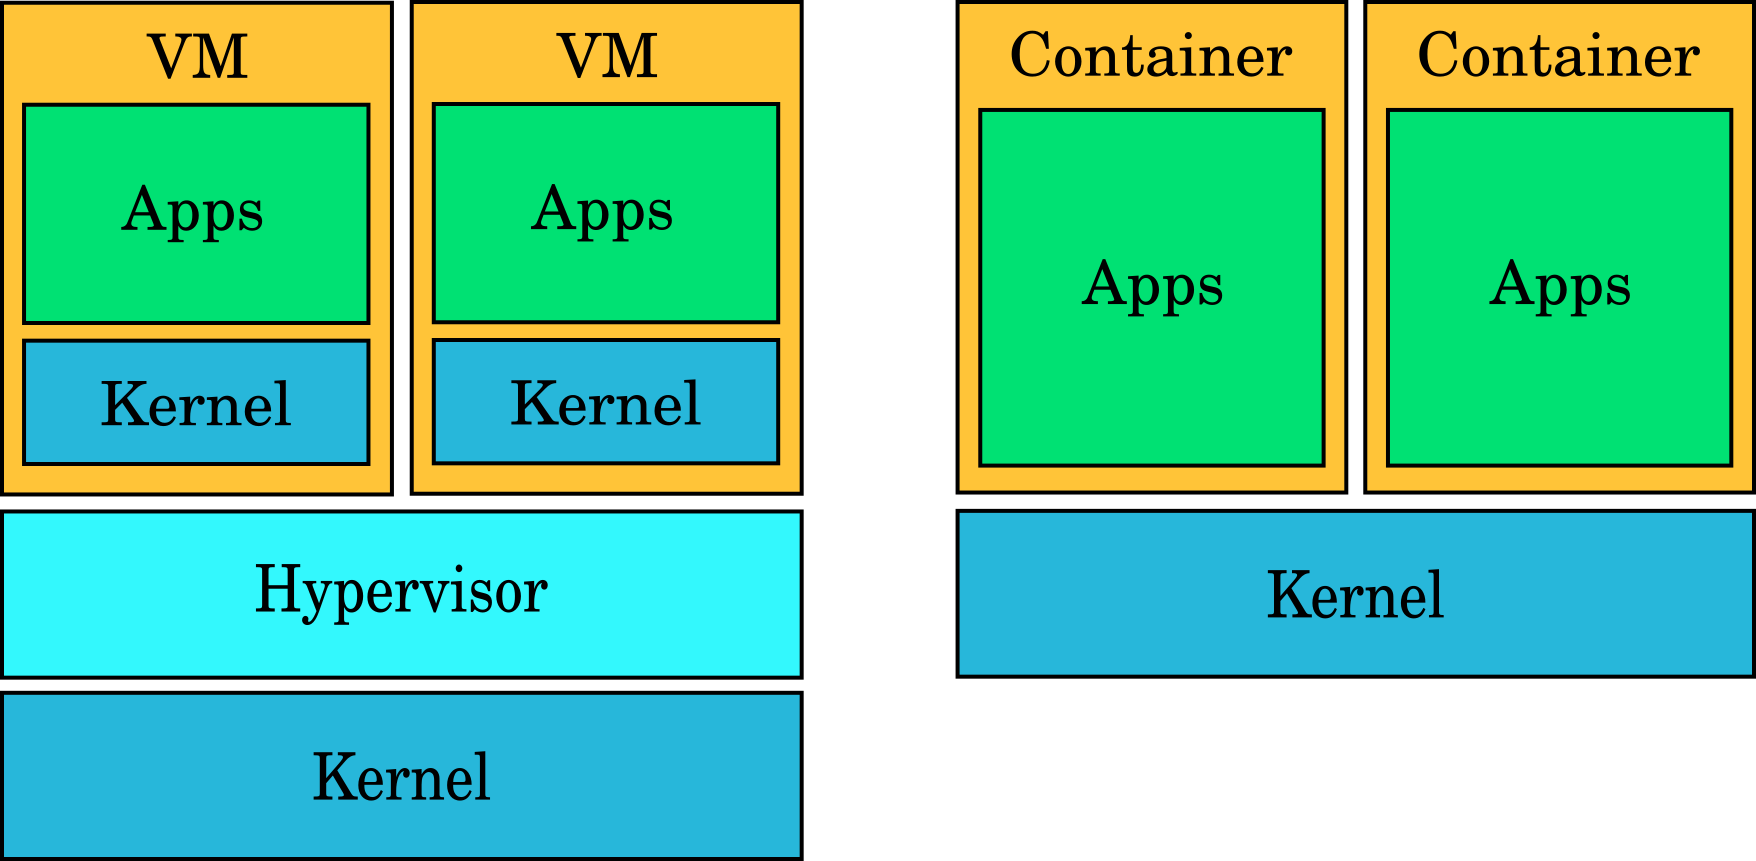 The difference between virtual machines and containers